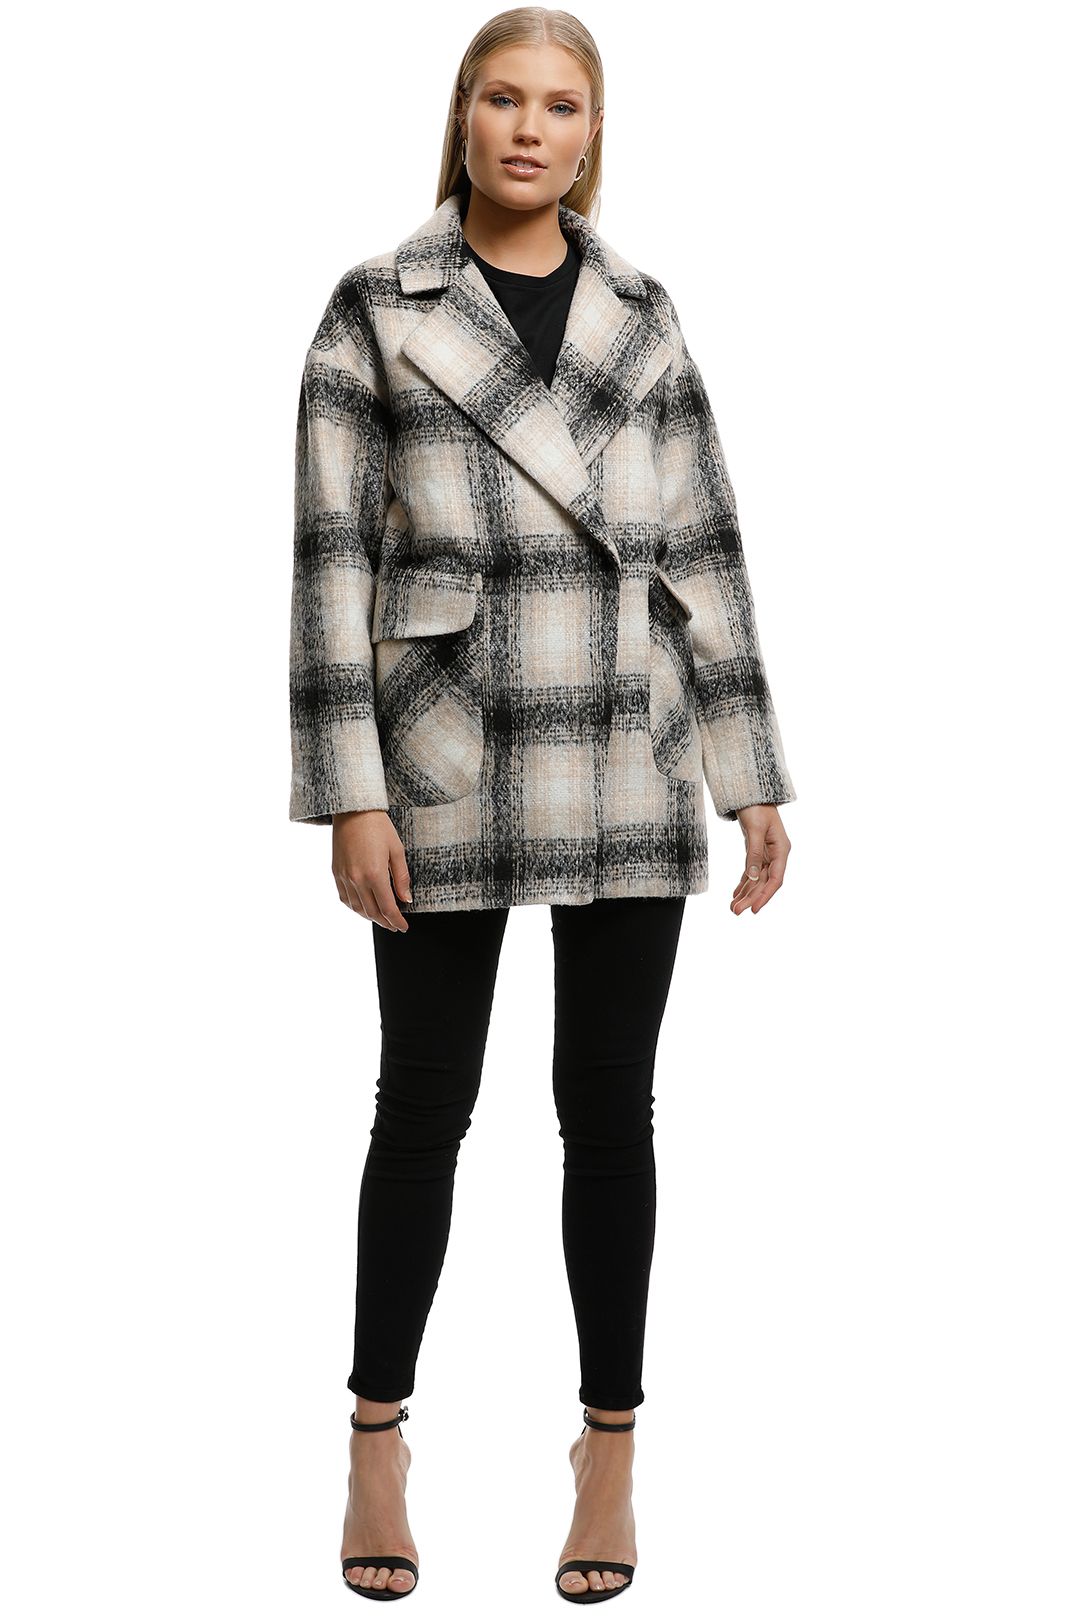 Wish - Wire Coat - Check - Front